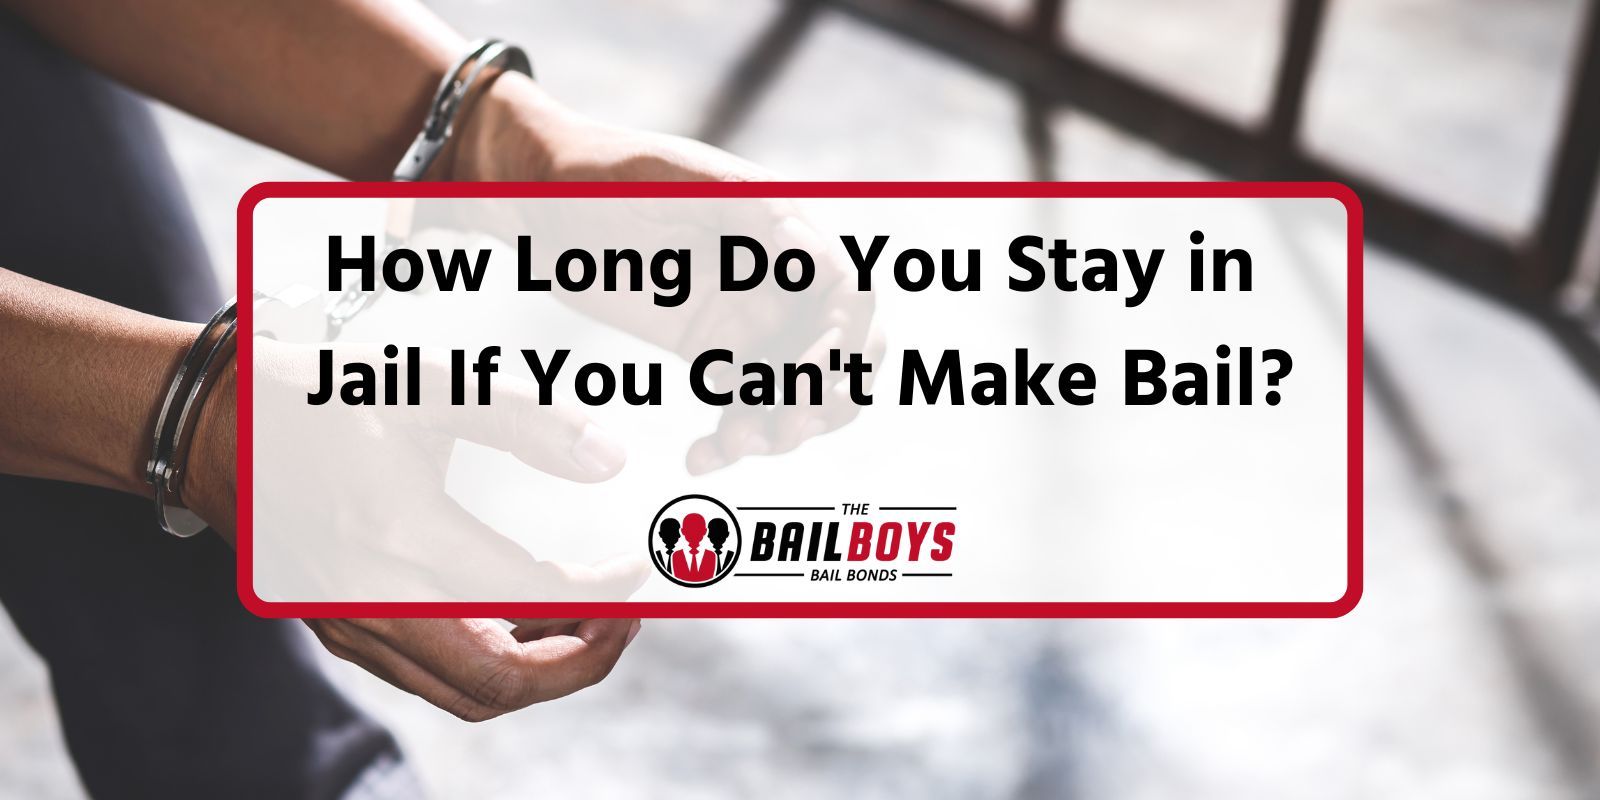 How Long Do You Stay in Jail If You Can't Make Bail?